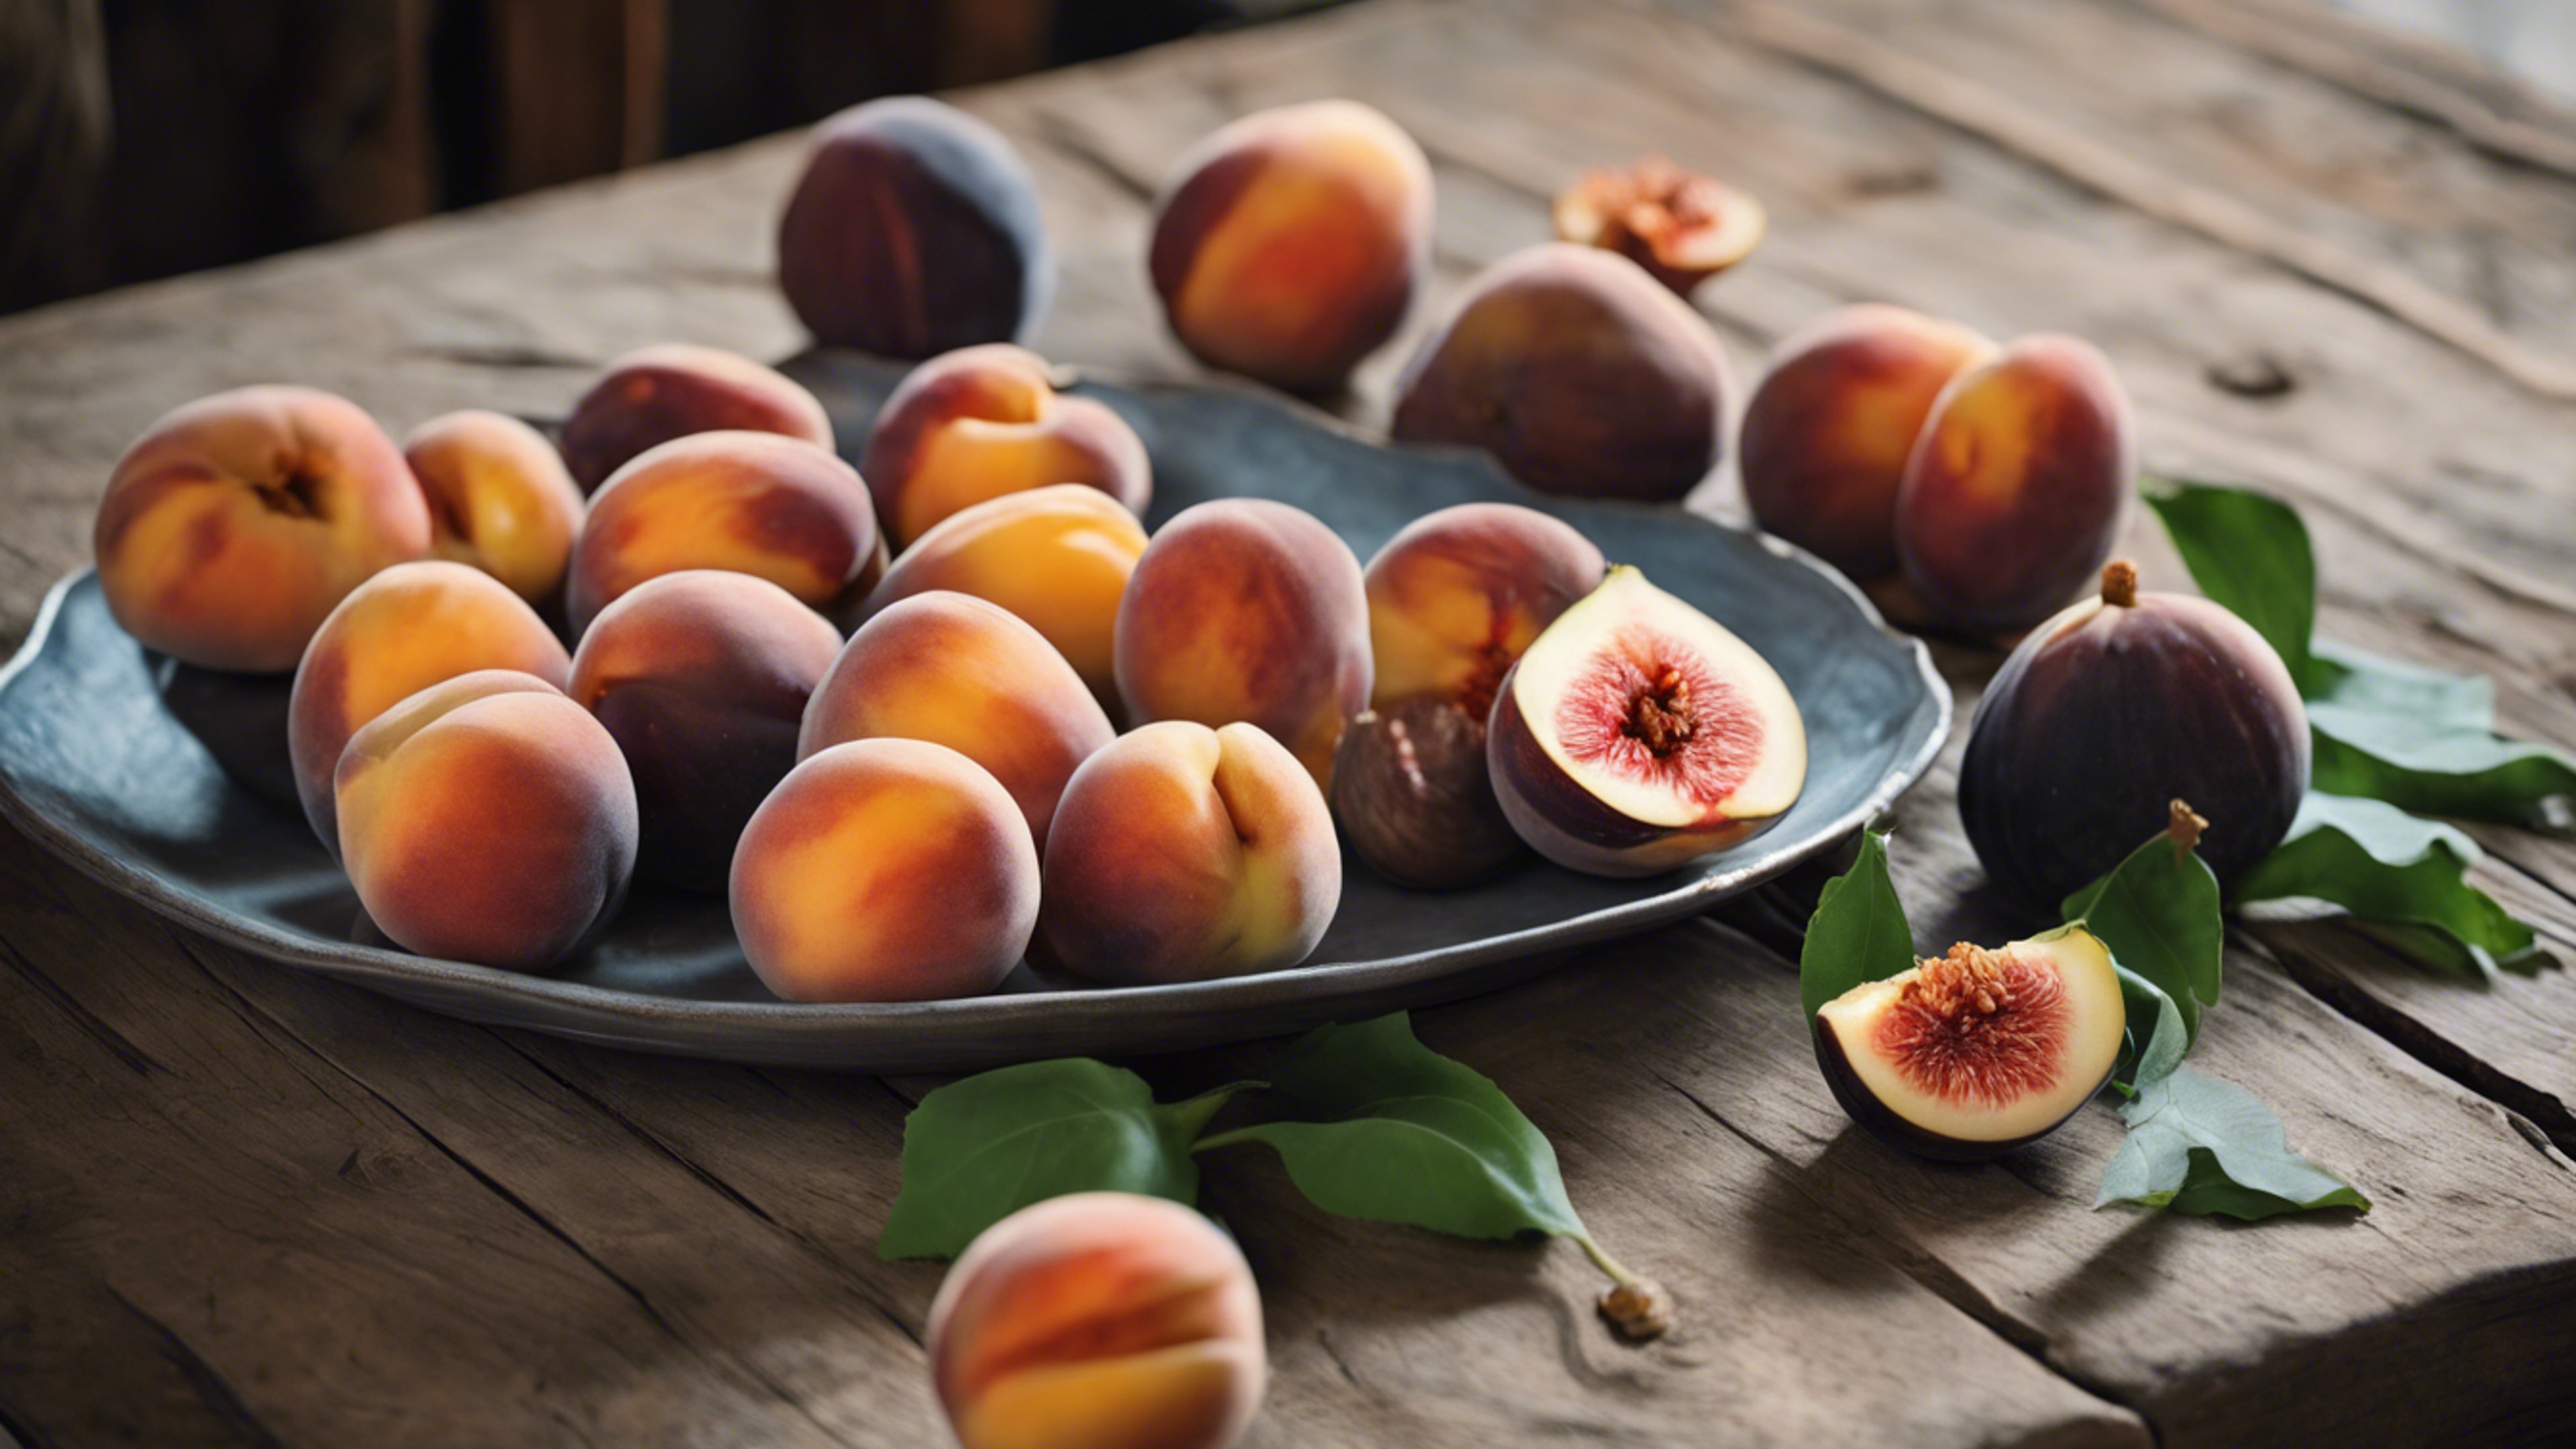 Still life of peaches and figs arranged beautifully on a rustic wooden table. Ფონი[c31d3ce6096543dcac89]